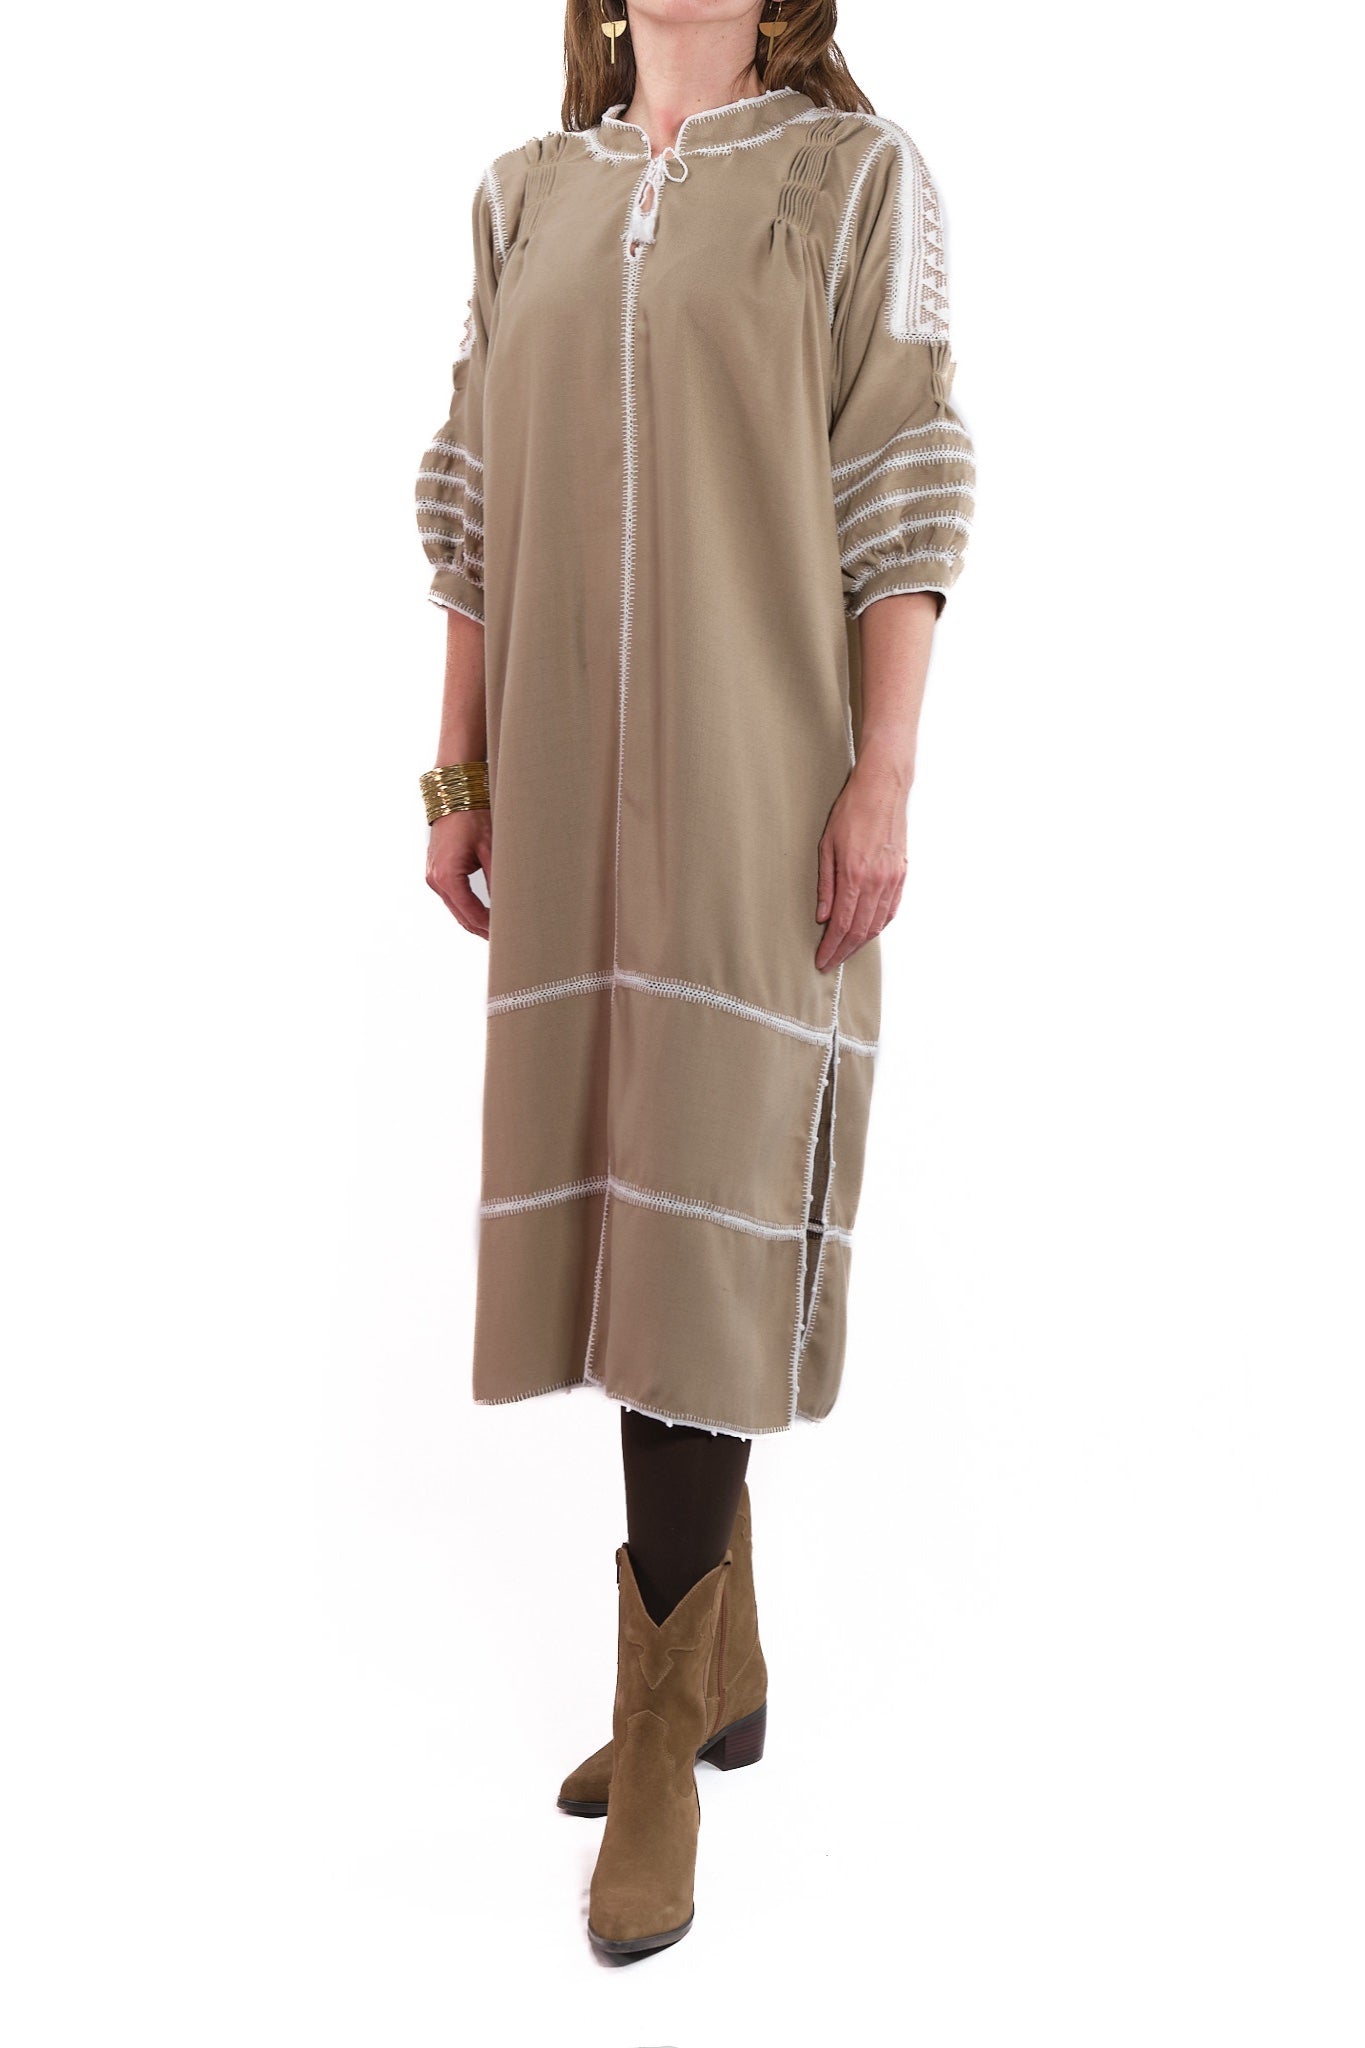 Odilia Dress light brown with white and brown embroidery